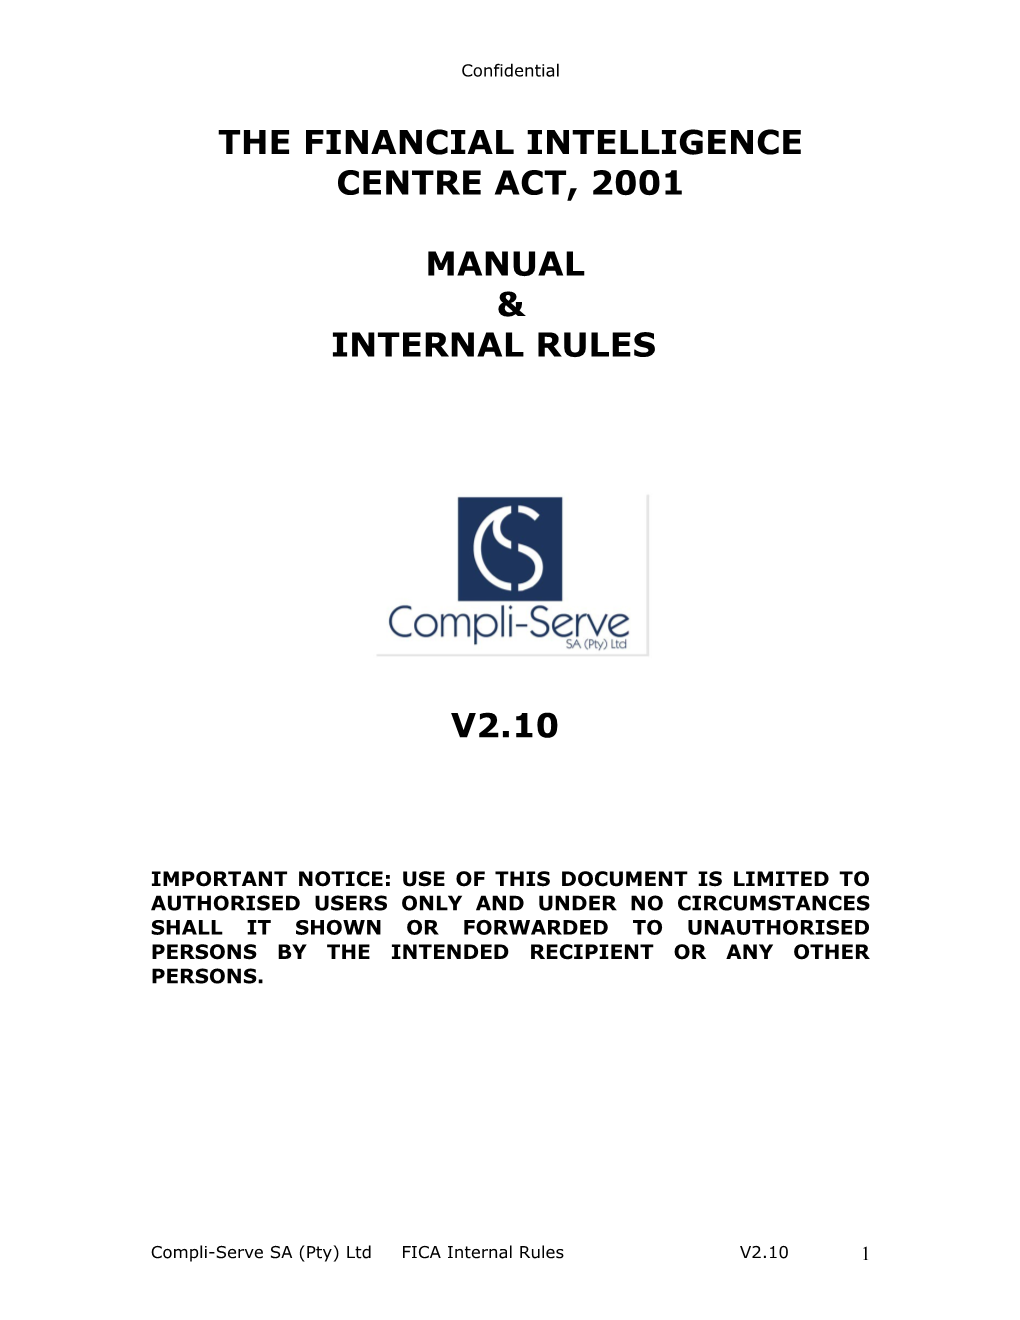 The Financial Intelligence Centre Act, 2001